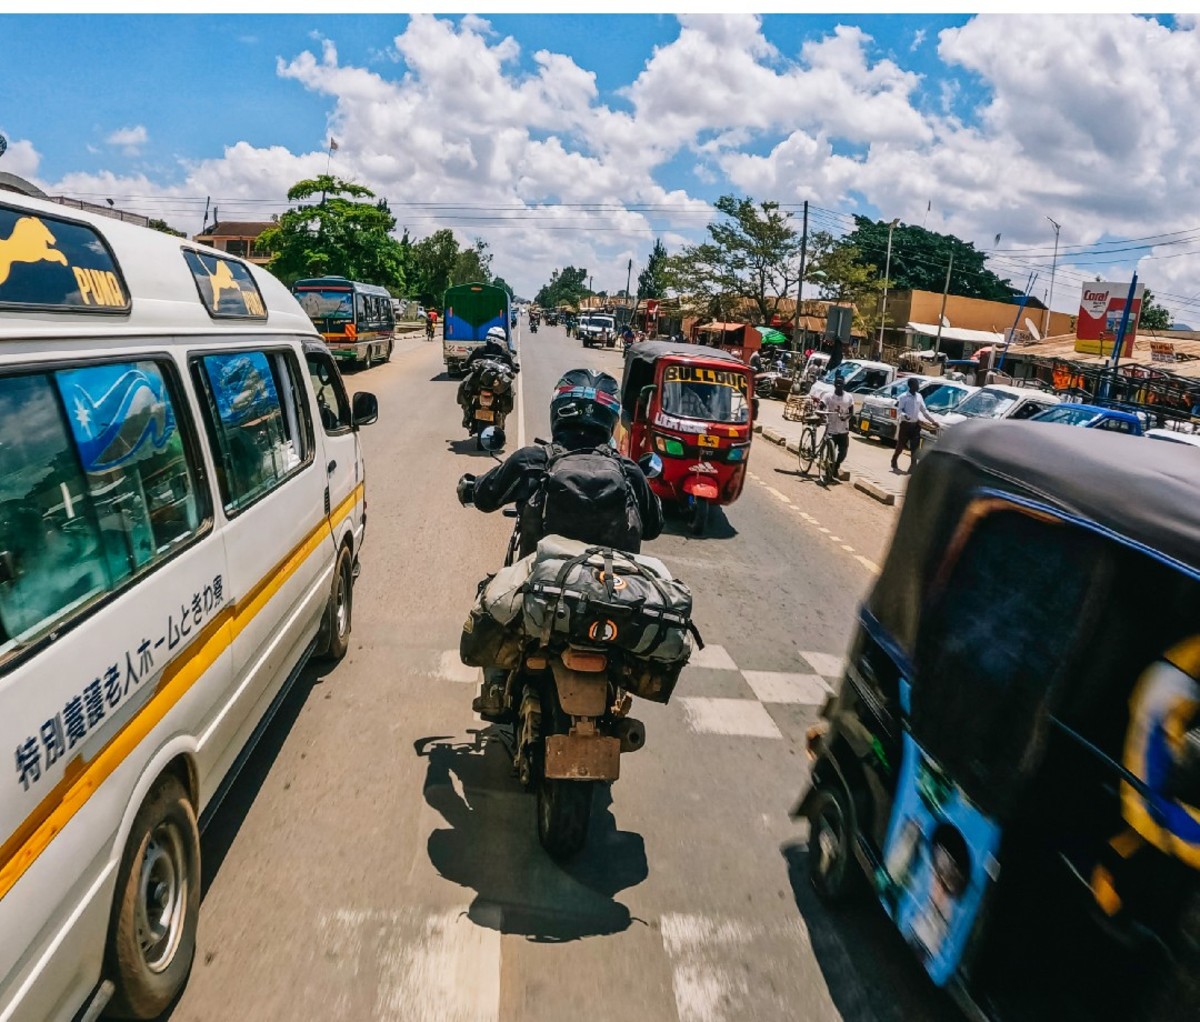 Motorcyclist splits lanes through traffic in an African city